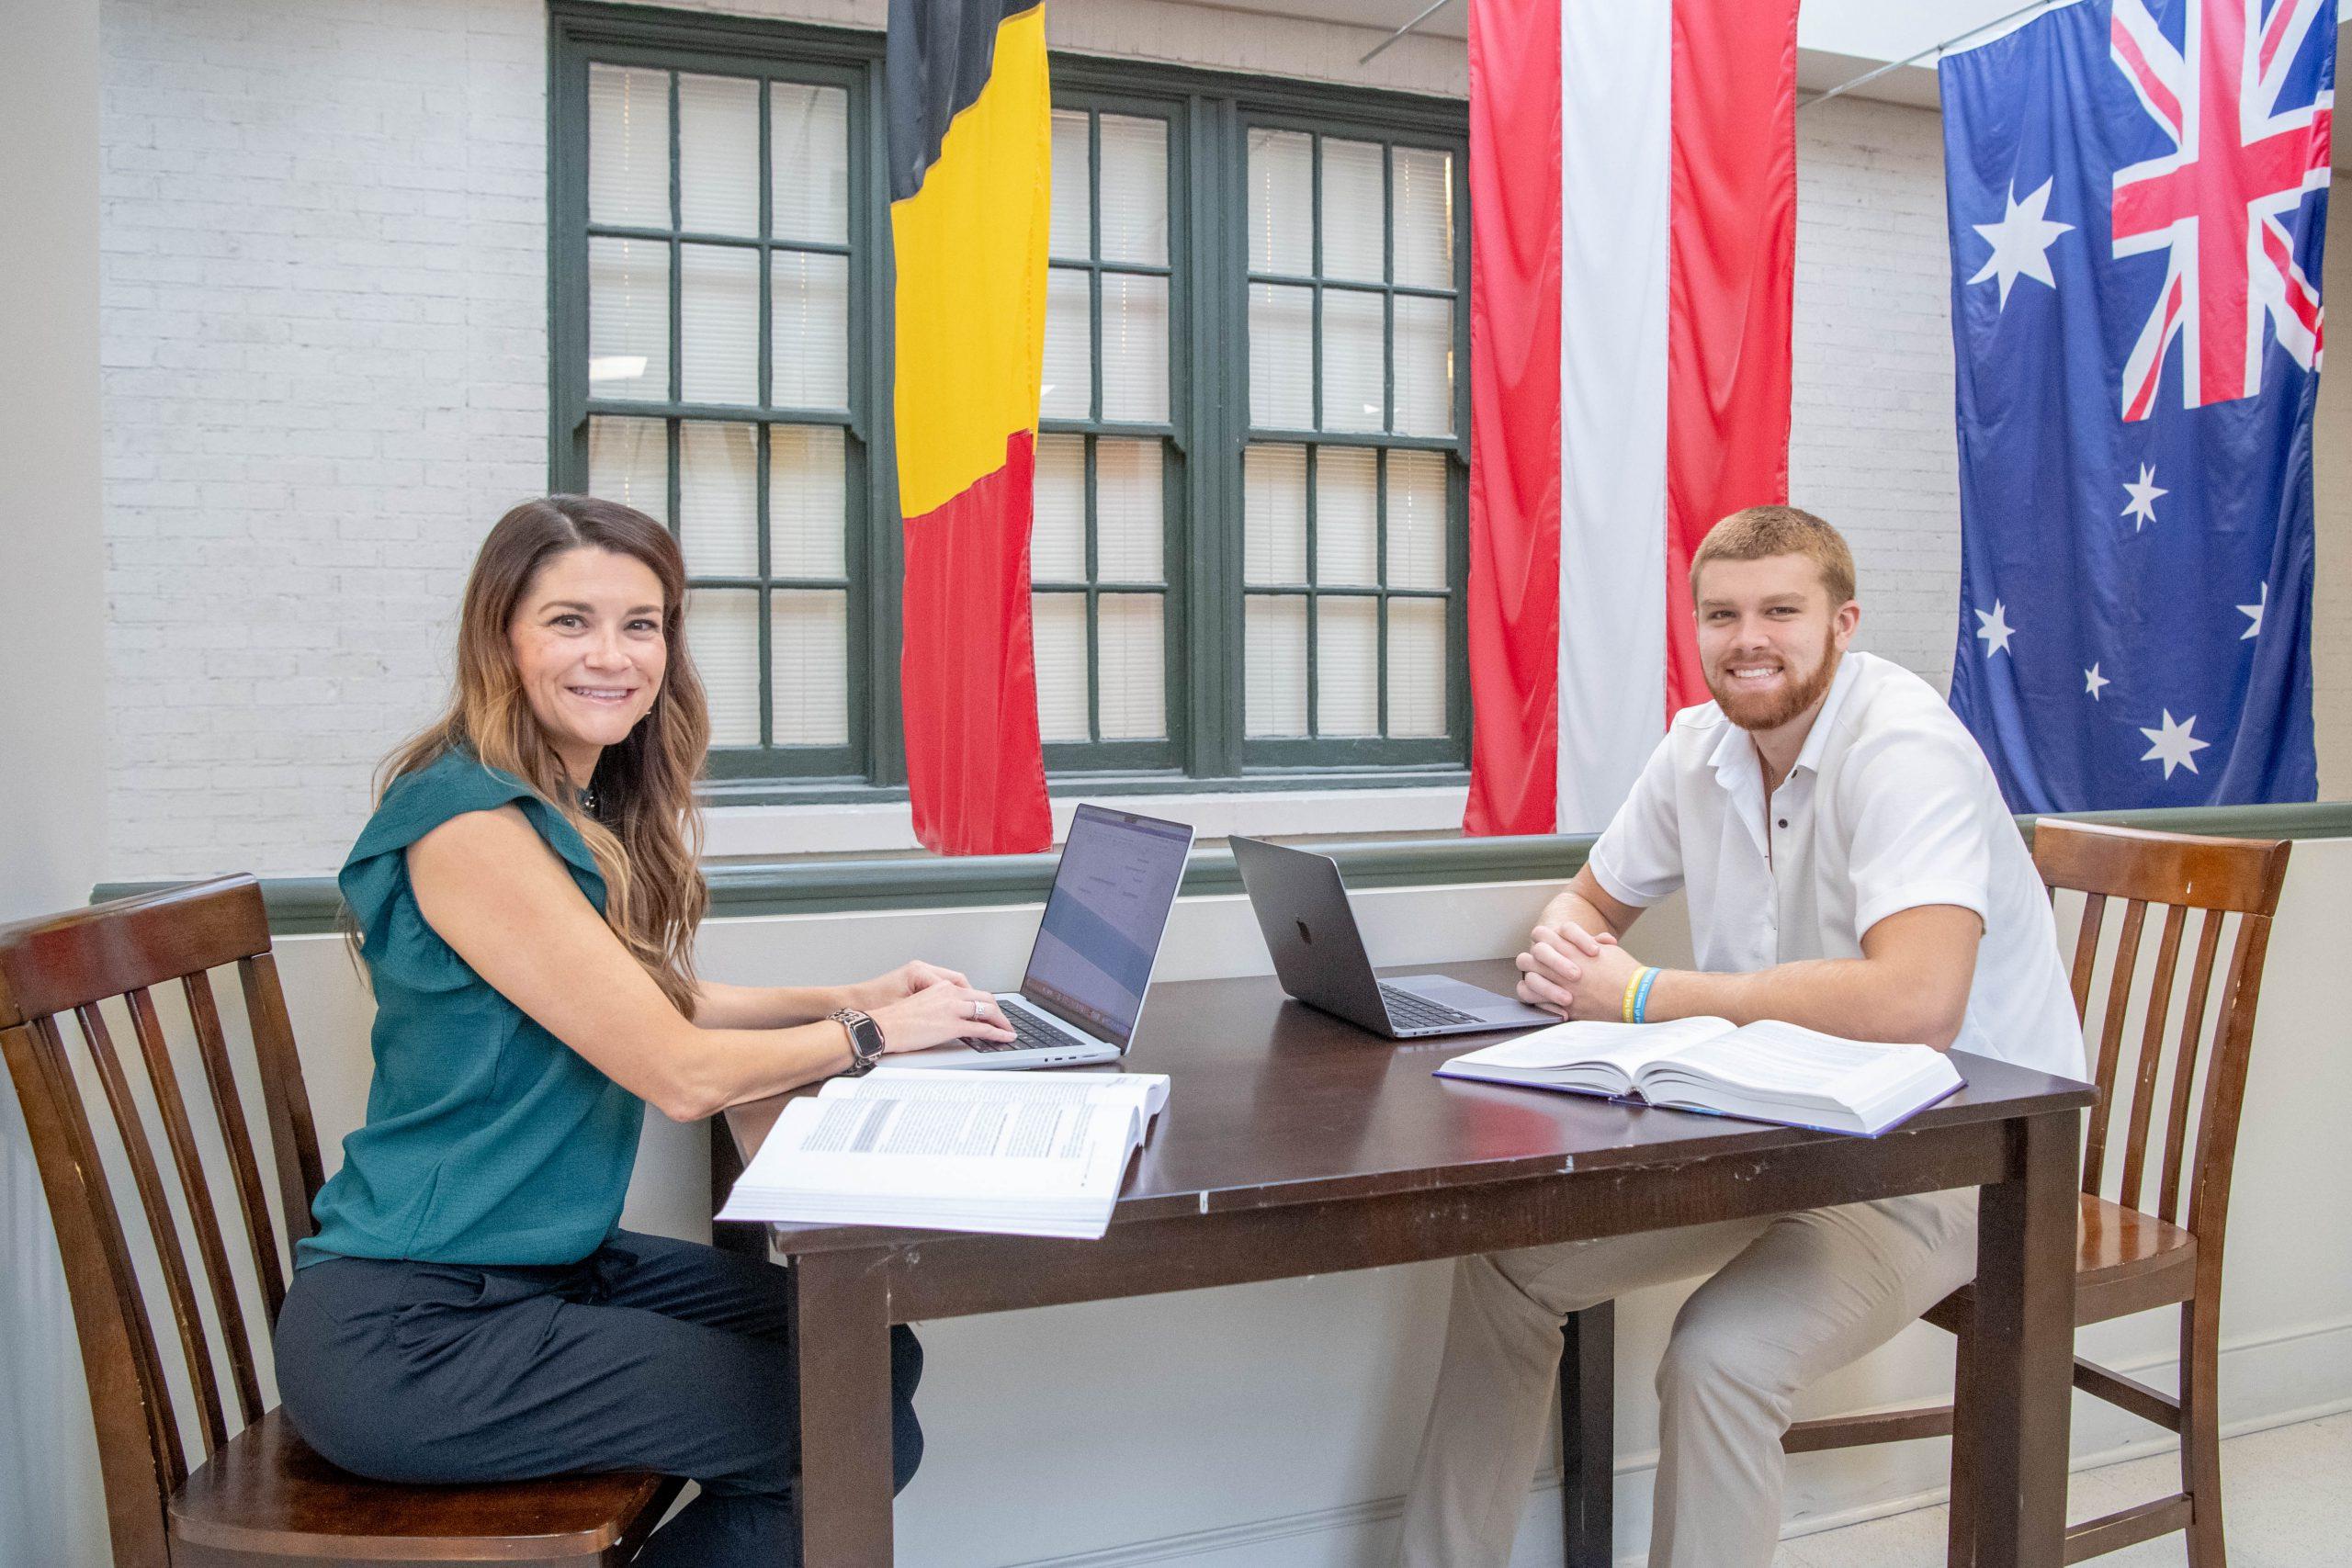 Two students working on assignment together in the College of Business and Aviation, both with a laptops and textbooks.